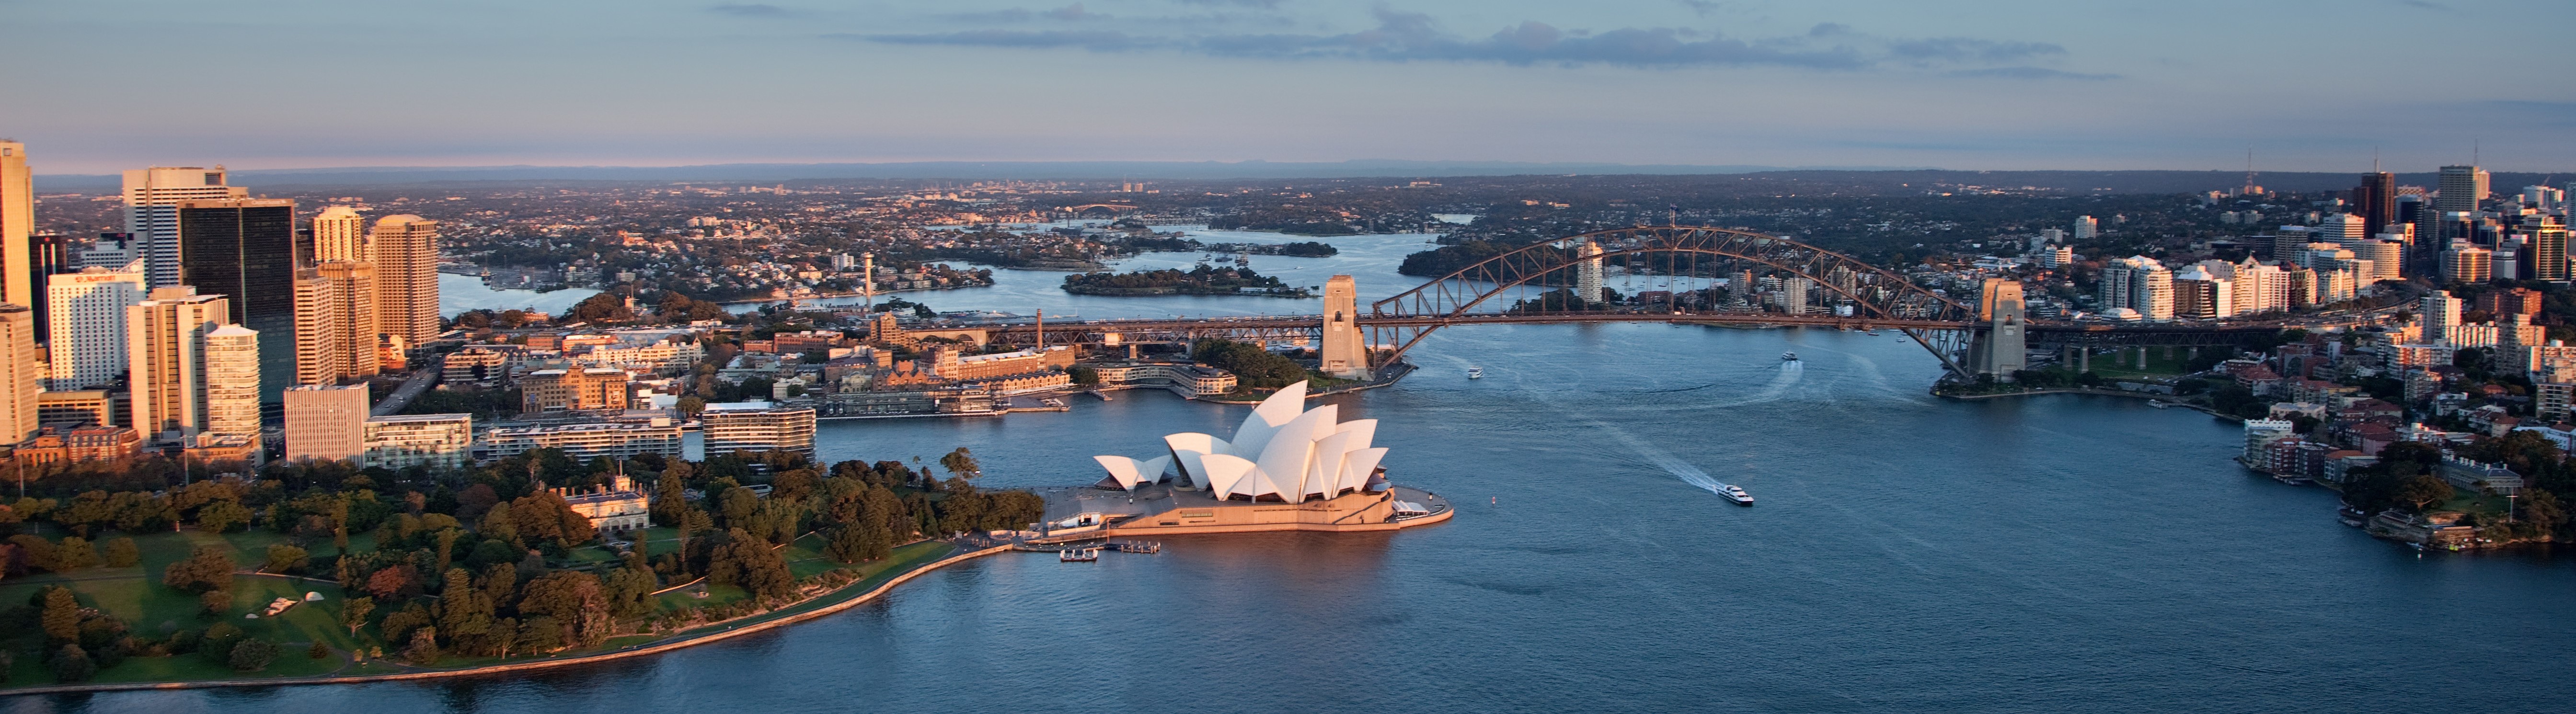 Panorama of Sydney Harbour